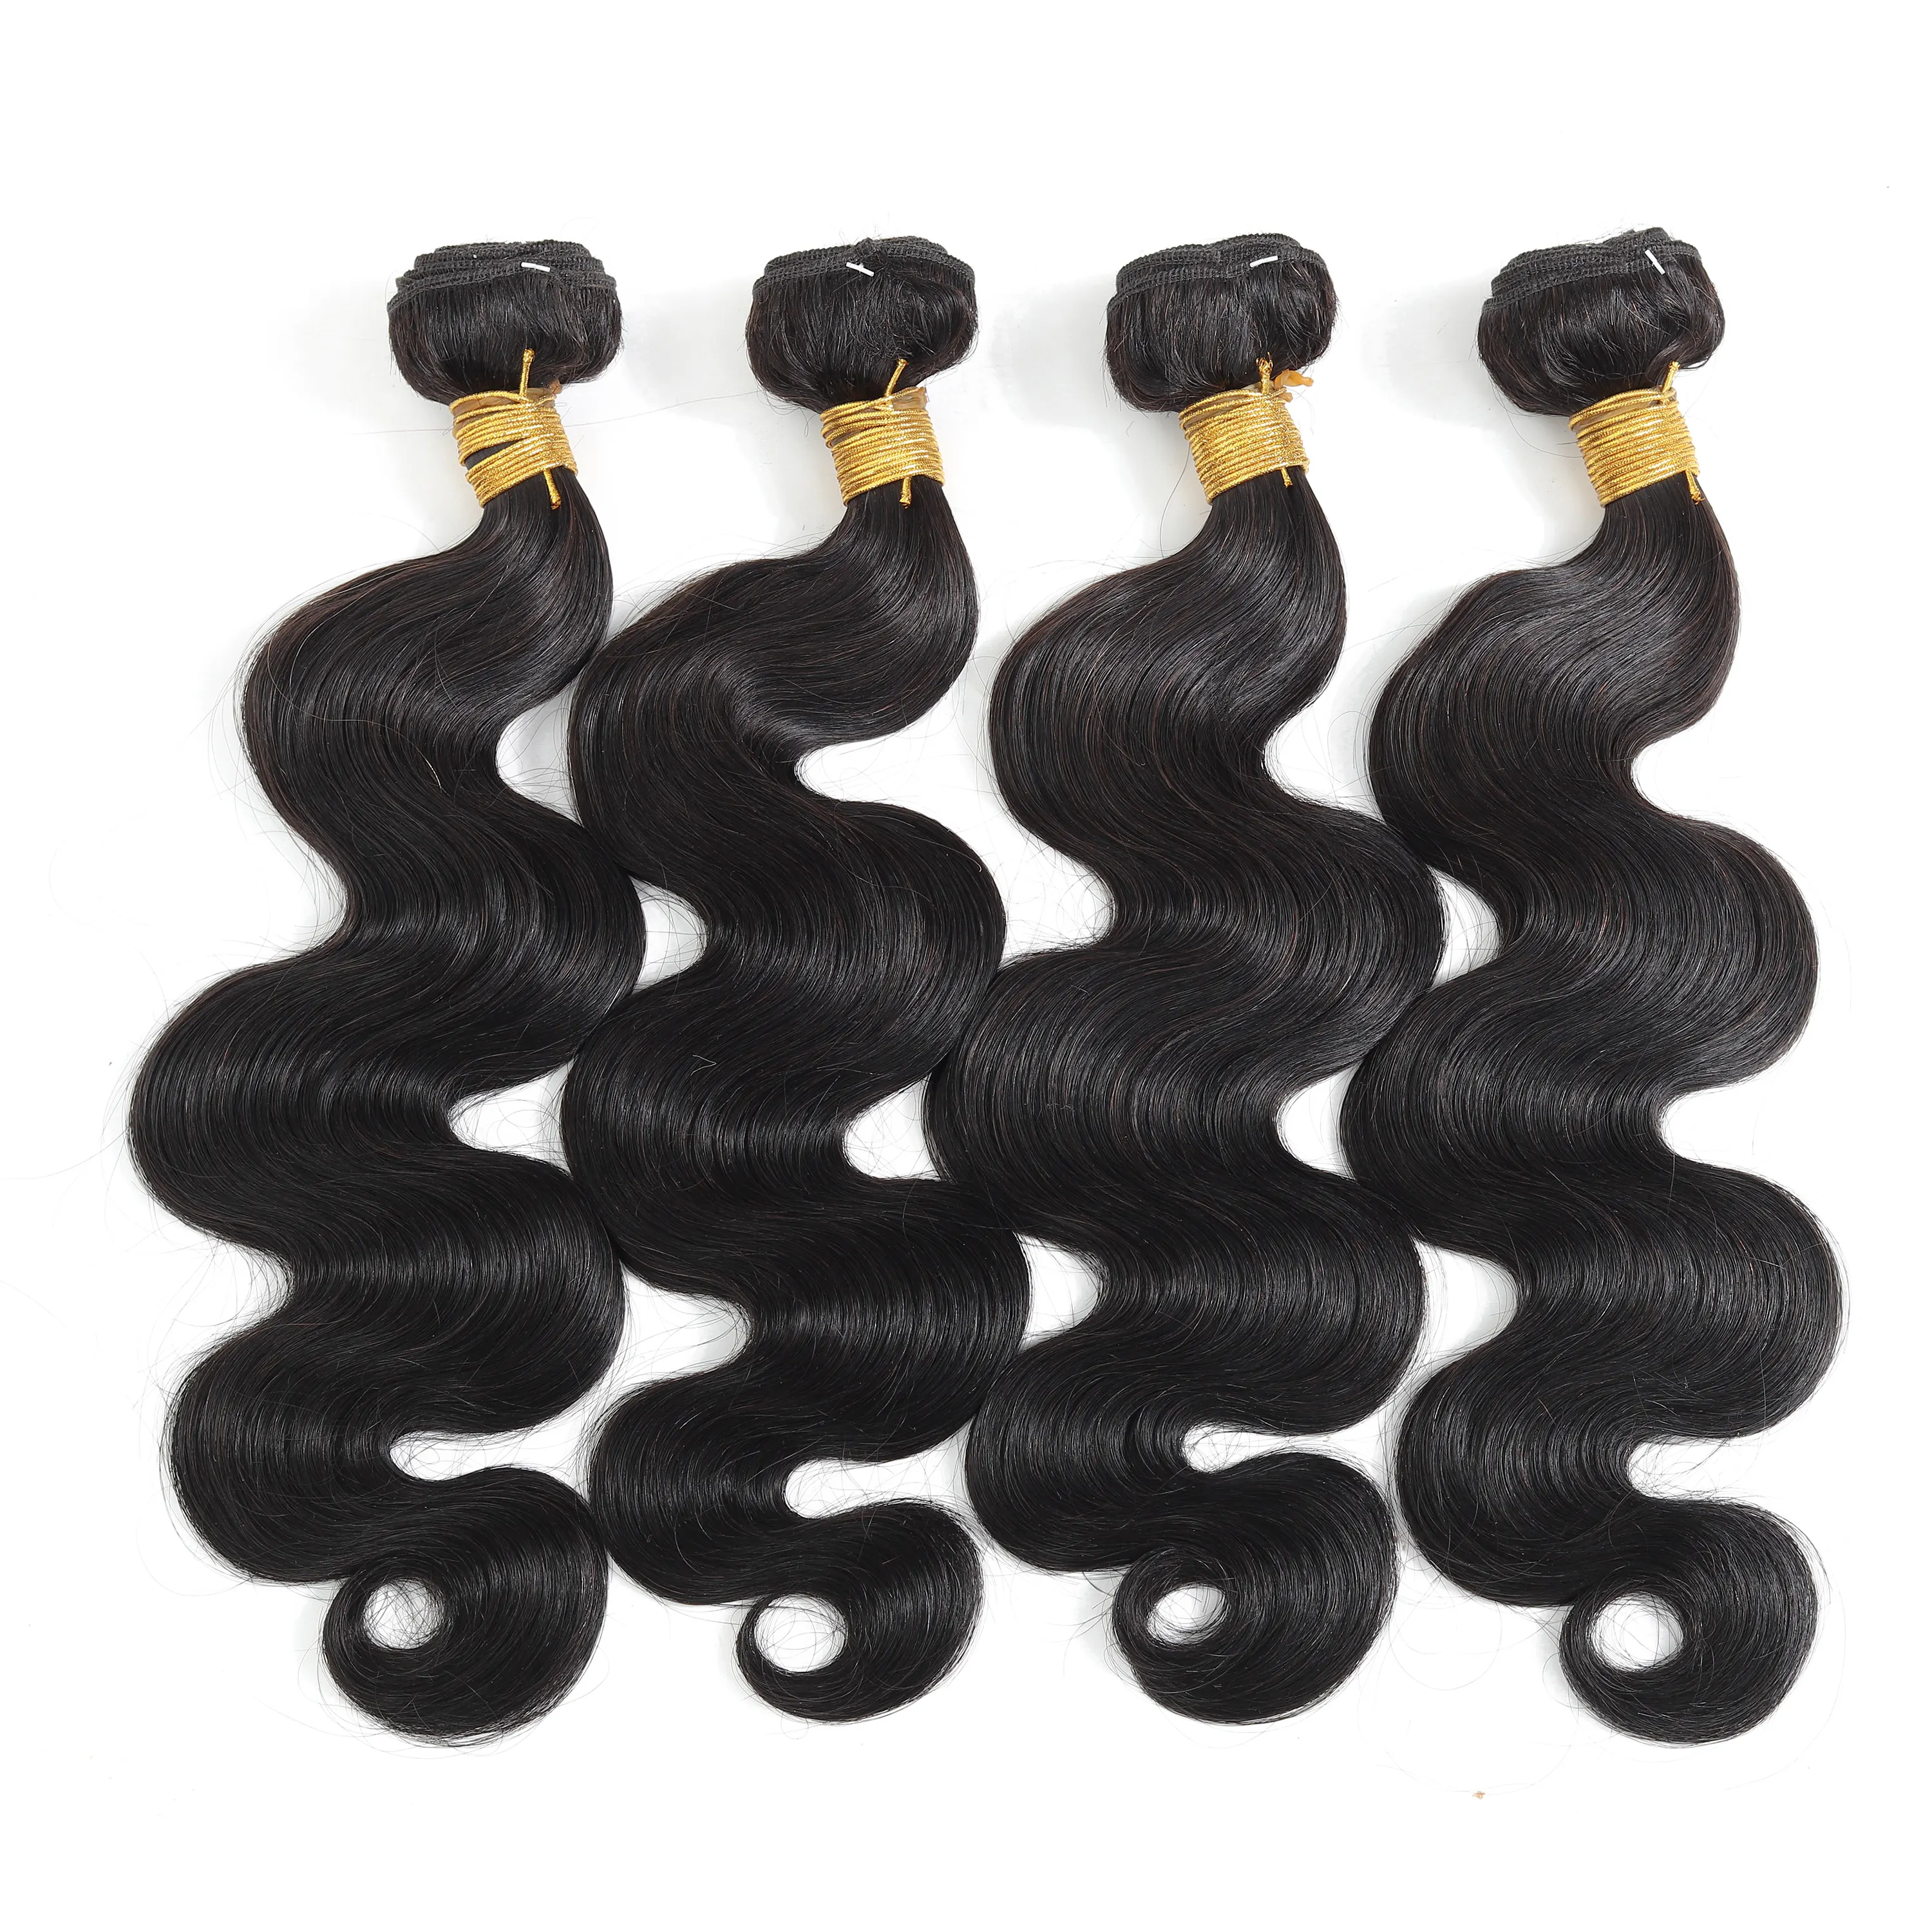 Wholesale Grade 12A Brazilian Cuticle Aligned Human Hair Body Wave 100% Human Hair Extension For Black Women Natural Color Remy